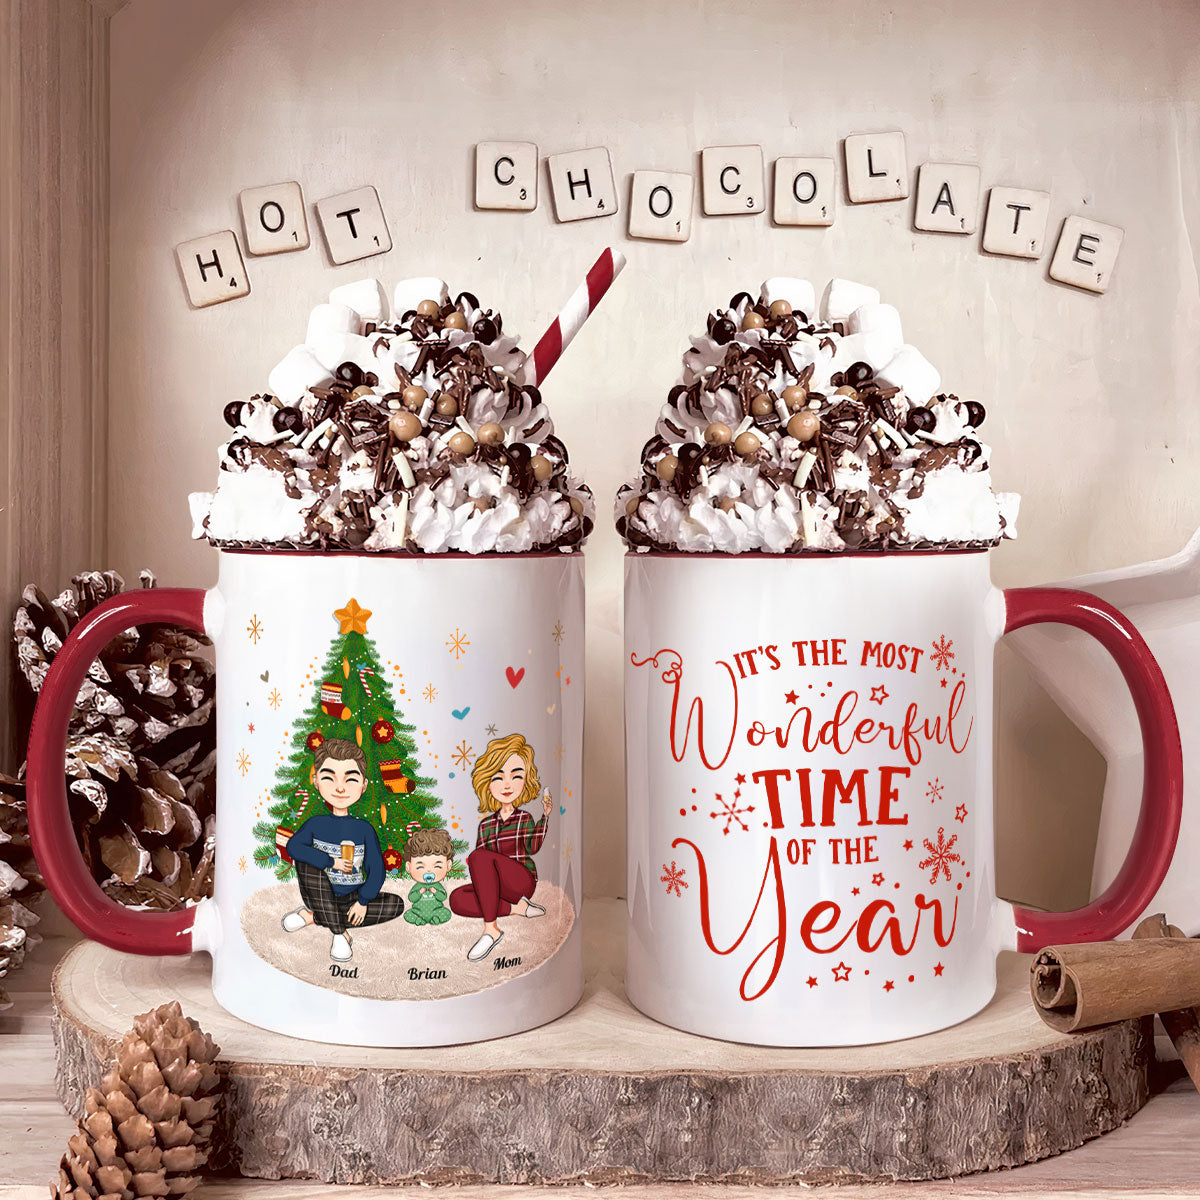 It's The Most Wonderful Time Of The Year - Personalized Accent Mug